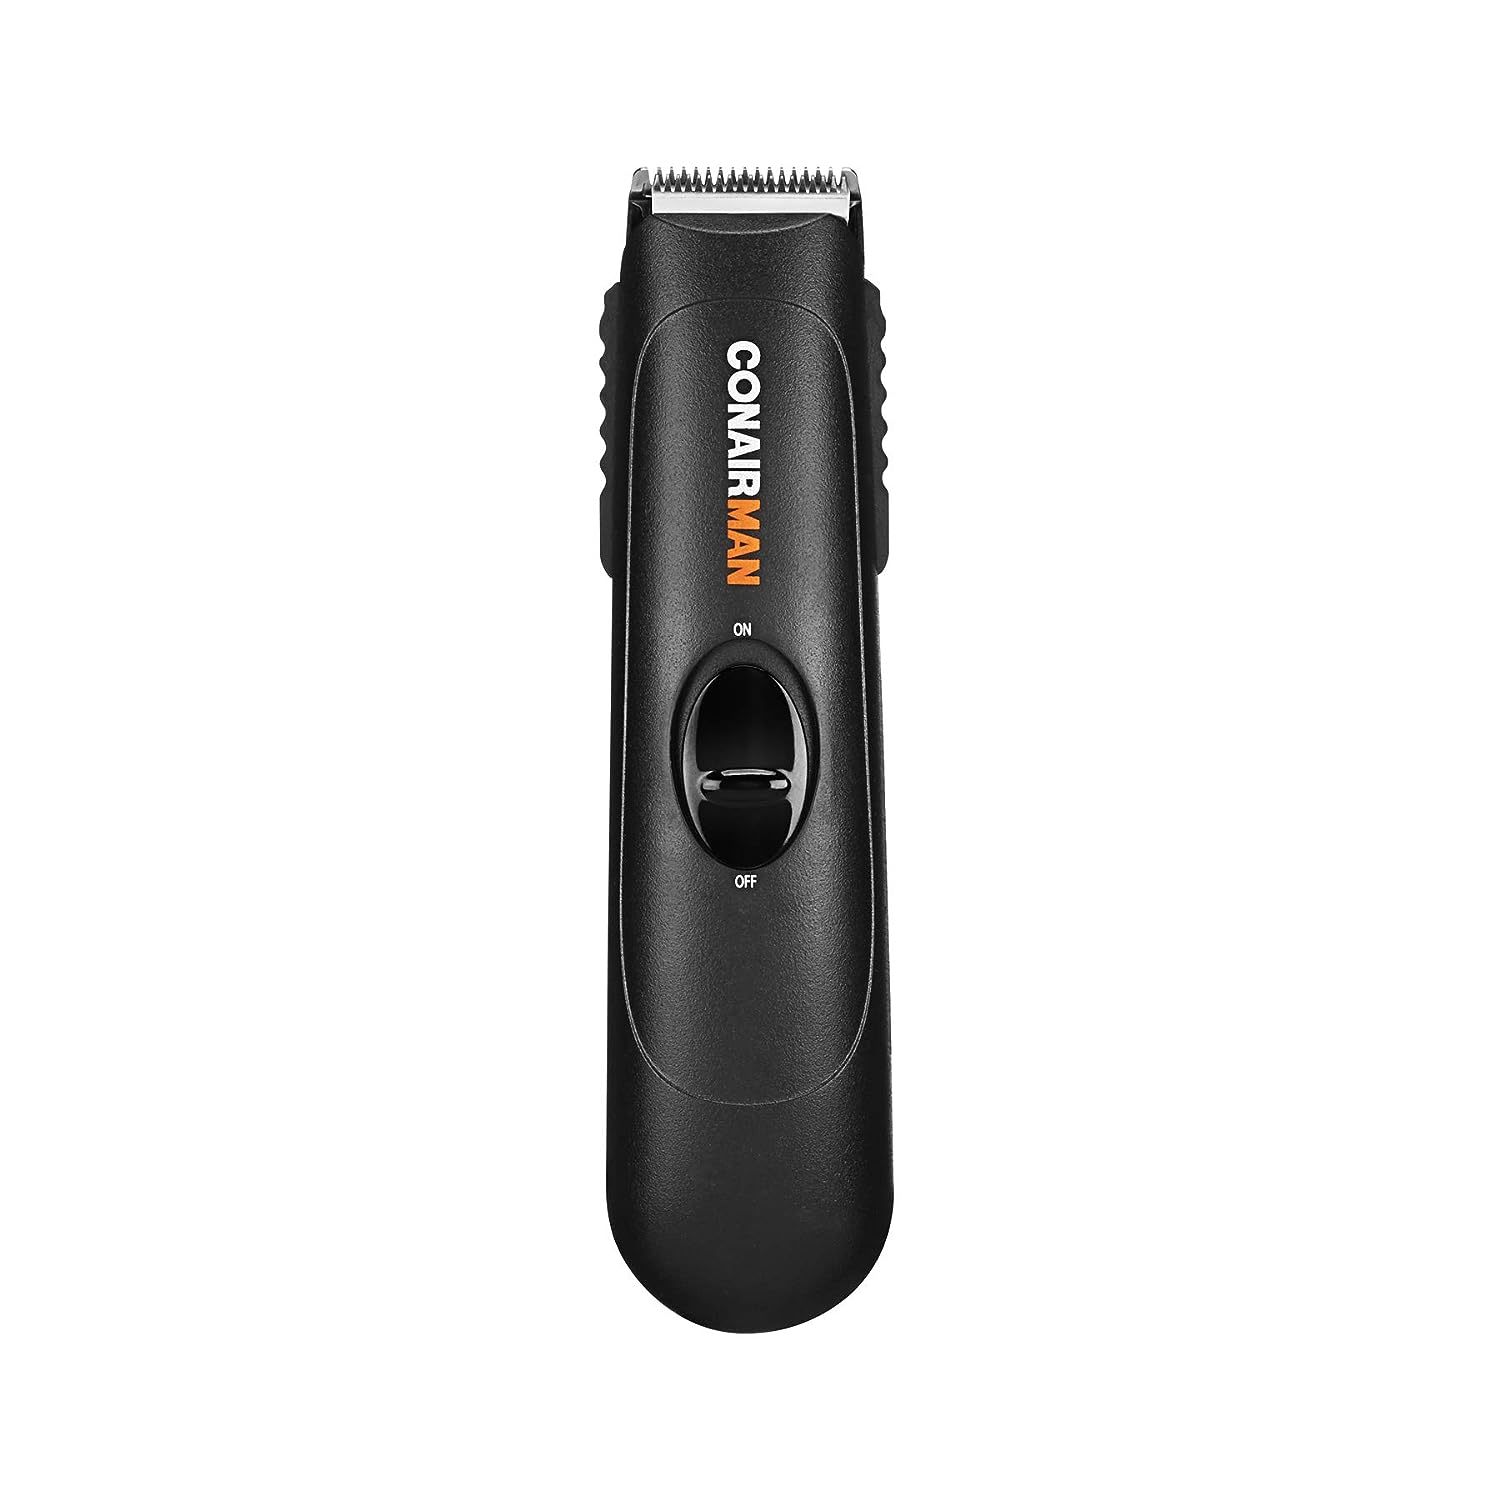 Primary image for Conairman Cordless Beard And Mustache Trimmer For Men.